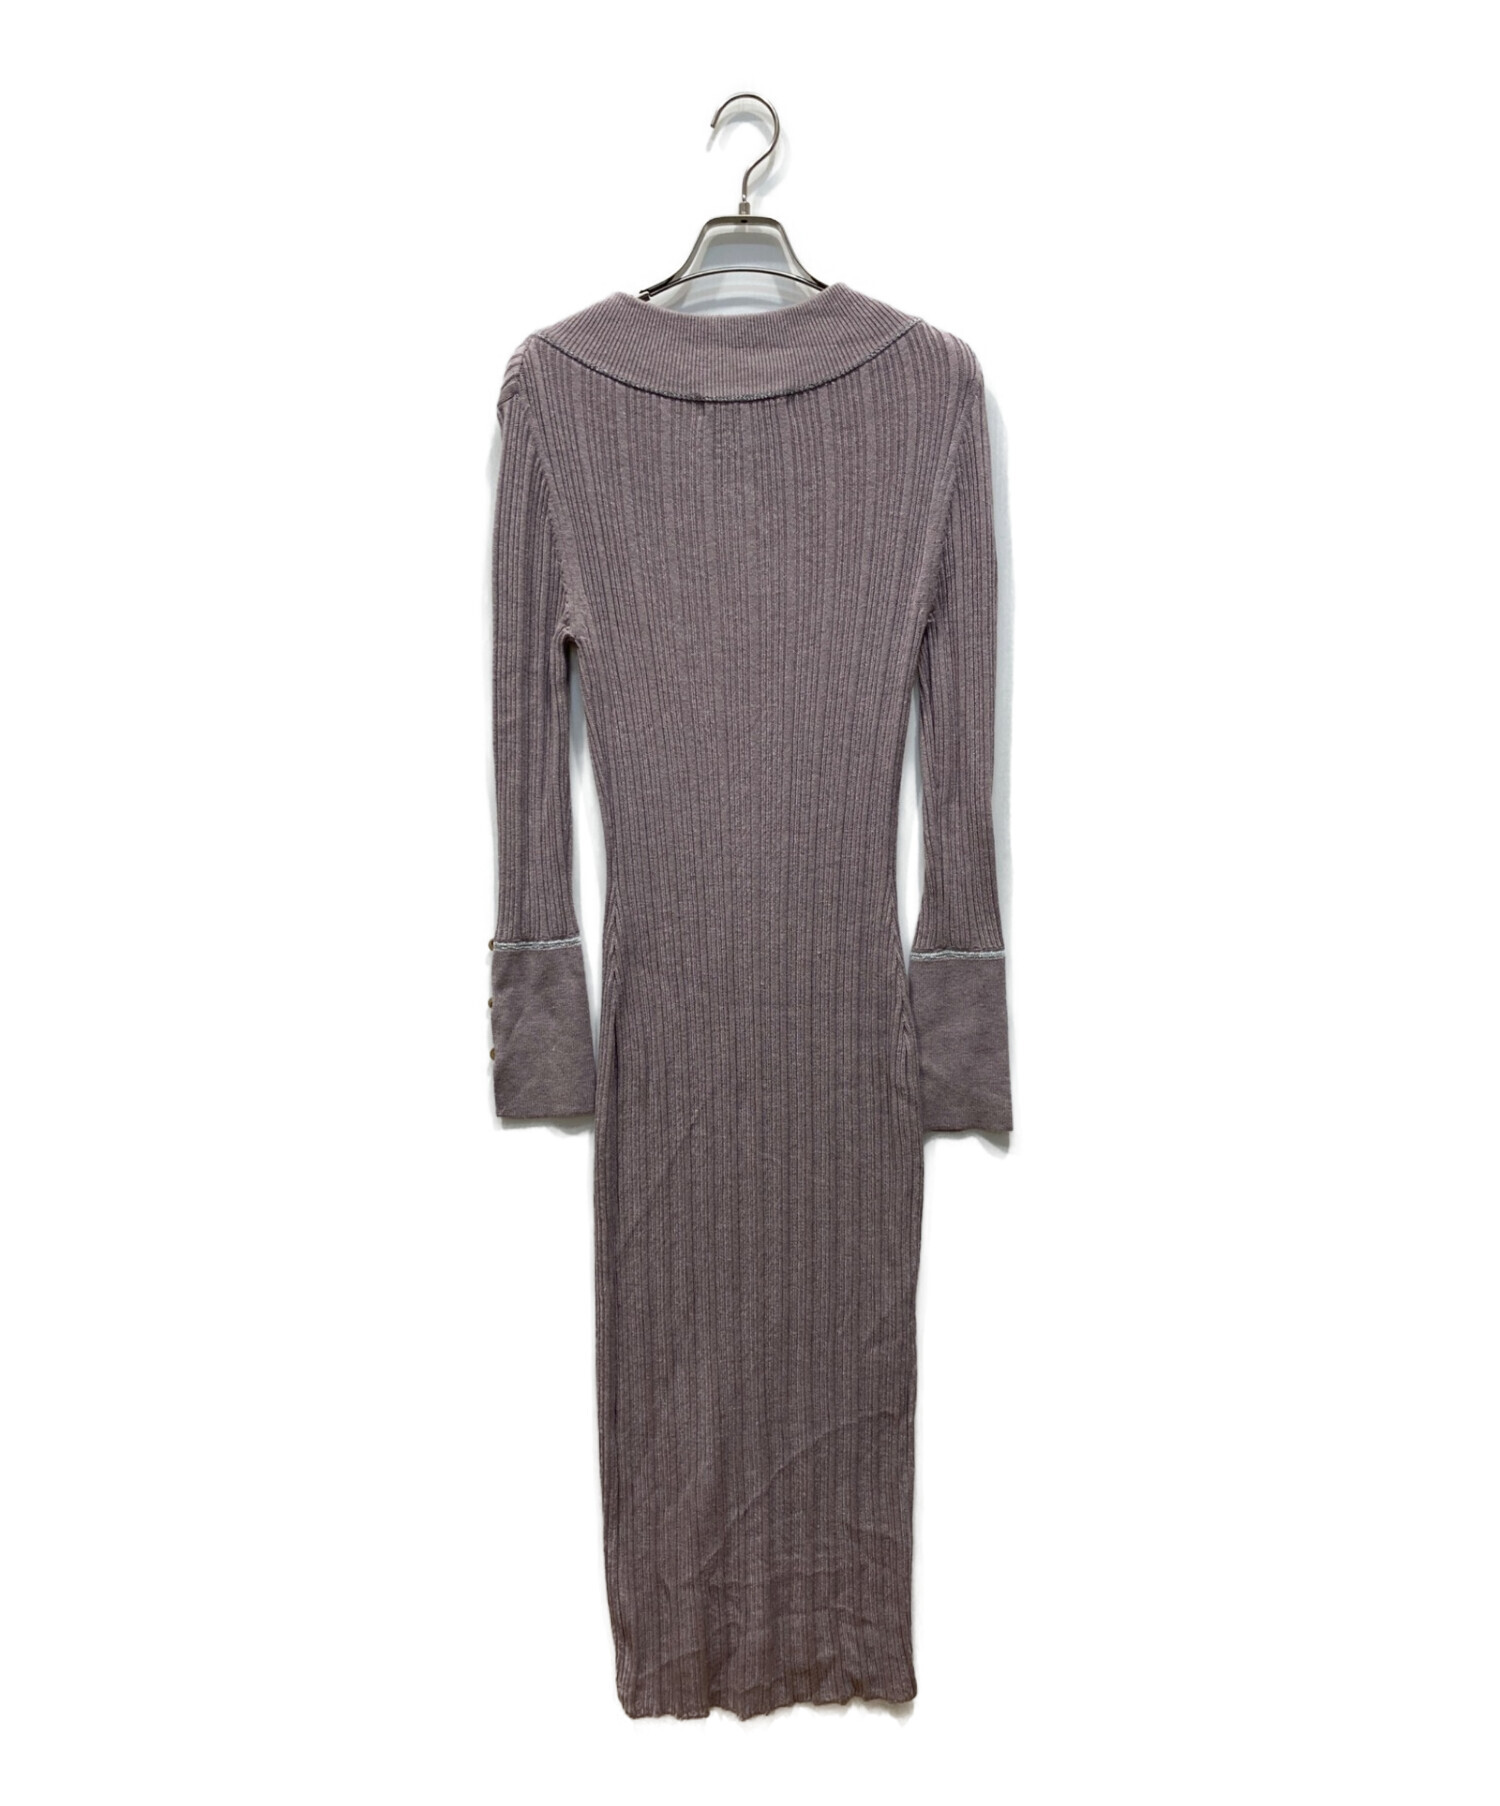 Her lip to Ribbed Stretch-Knit Dress